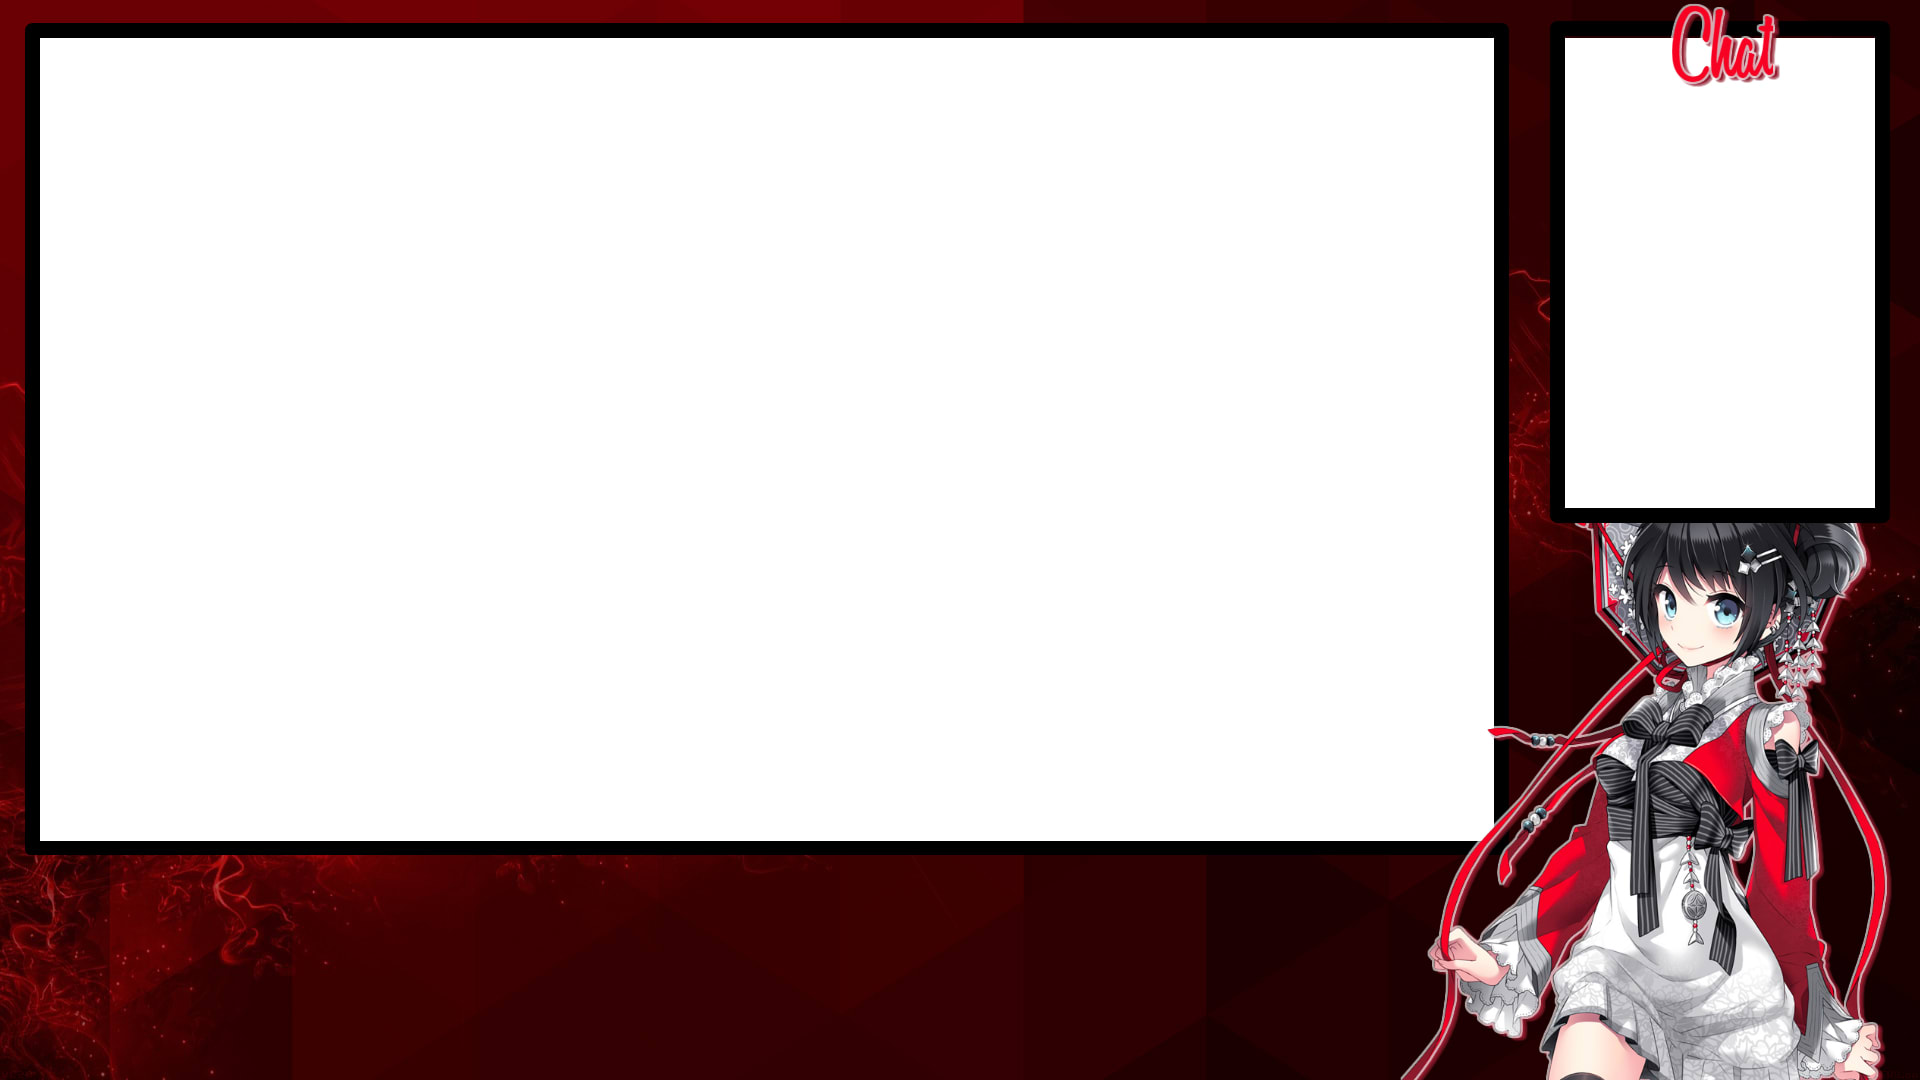 Make you a clean anime styled overlay by Wowerwerwerwer | Fiverr